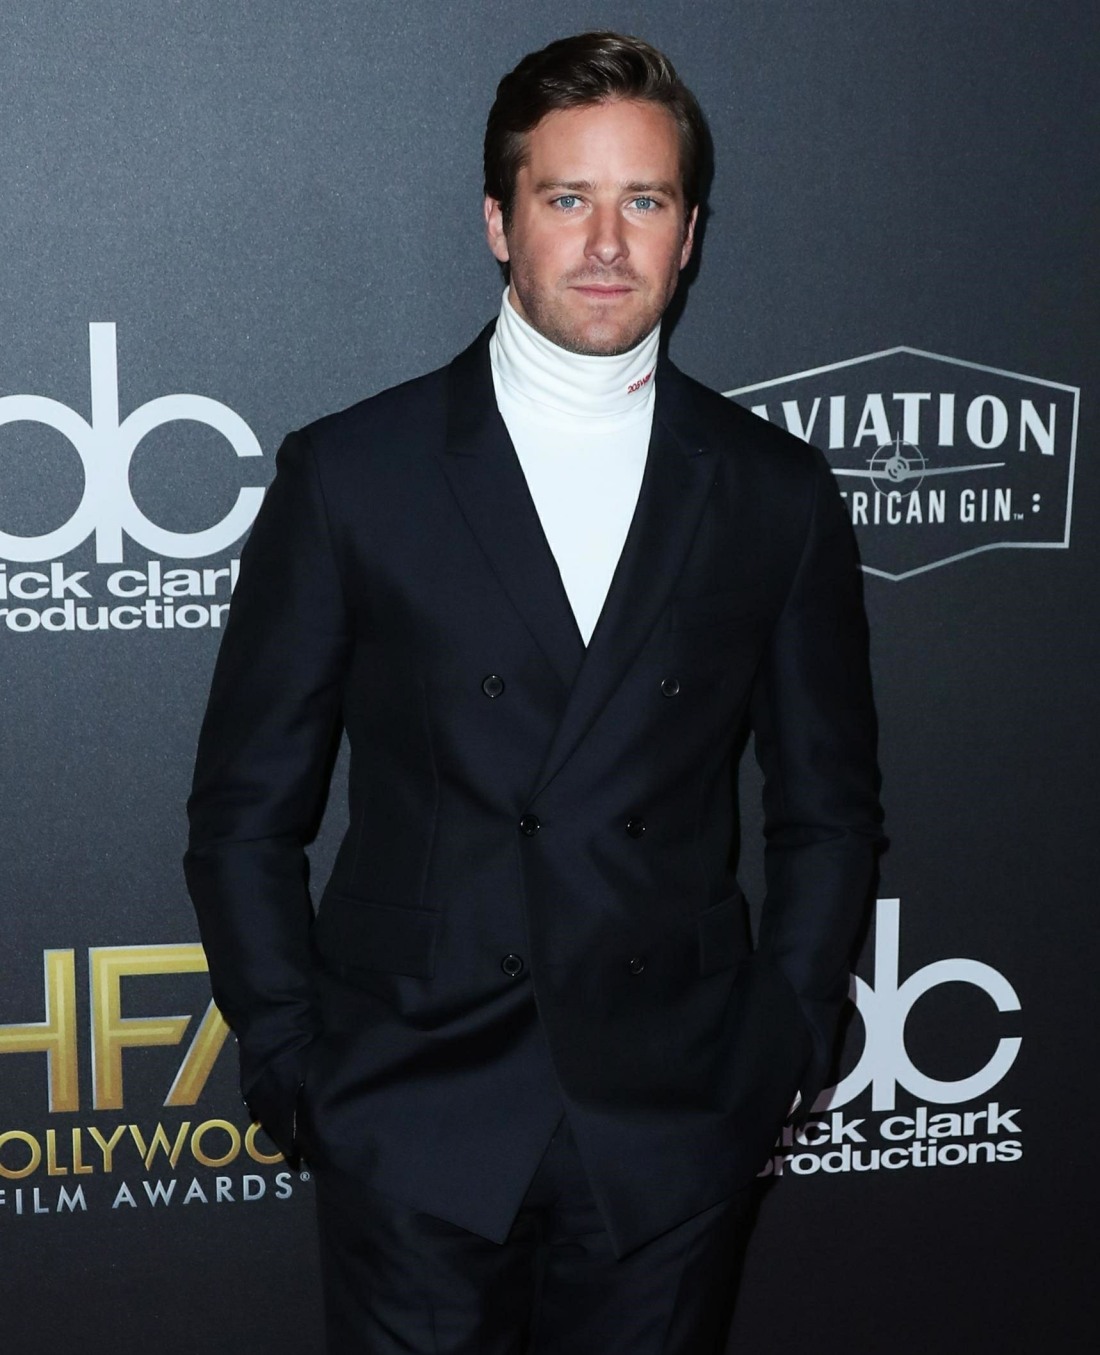 Armie Hammer wears Calvin Klein at the 22nd Annual Hollywood Film Awards